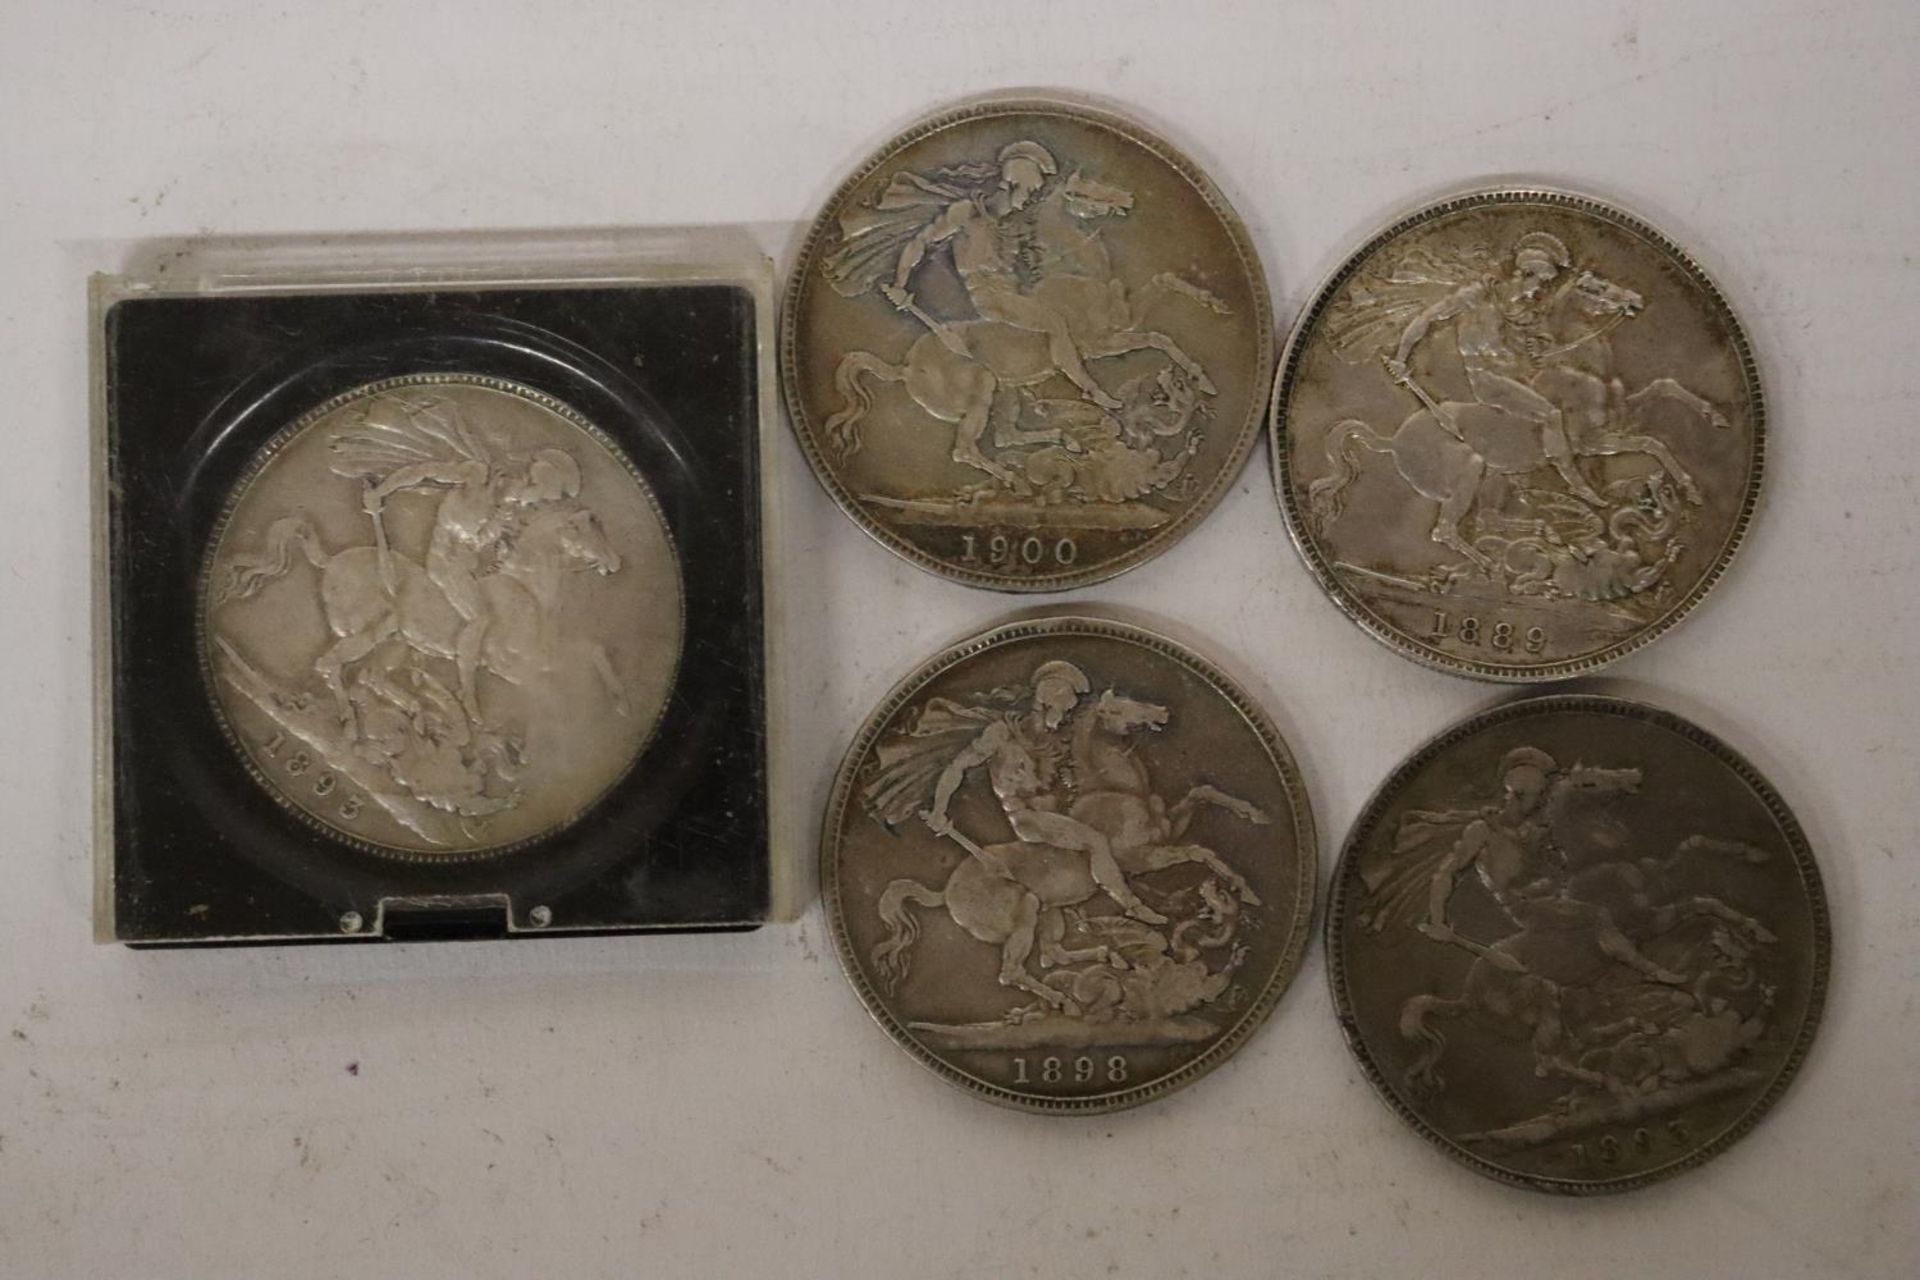 A SELECTION OF 5 QUEEN VICTORIA SILVER CROWNS DATED : 1893 X 2, 1898, 1899 & 1900